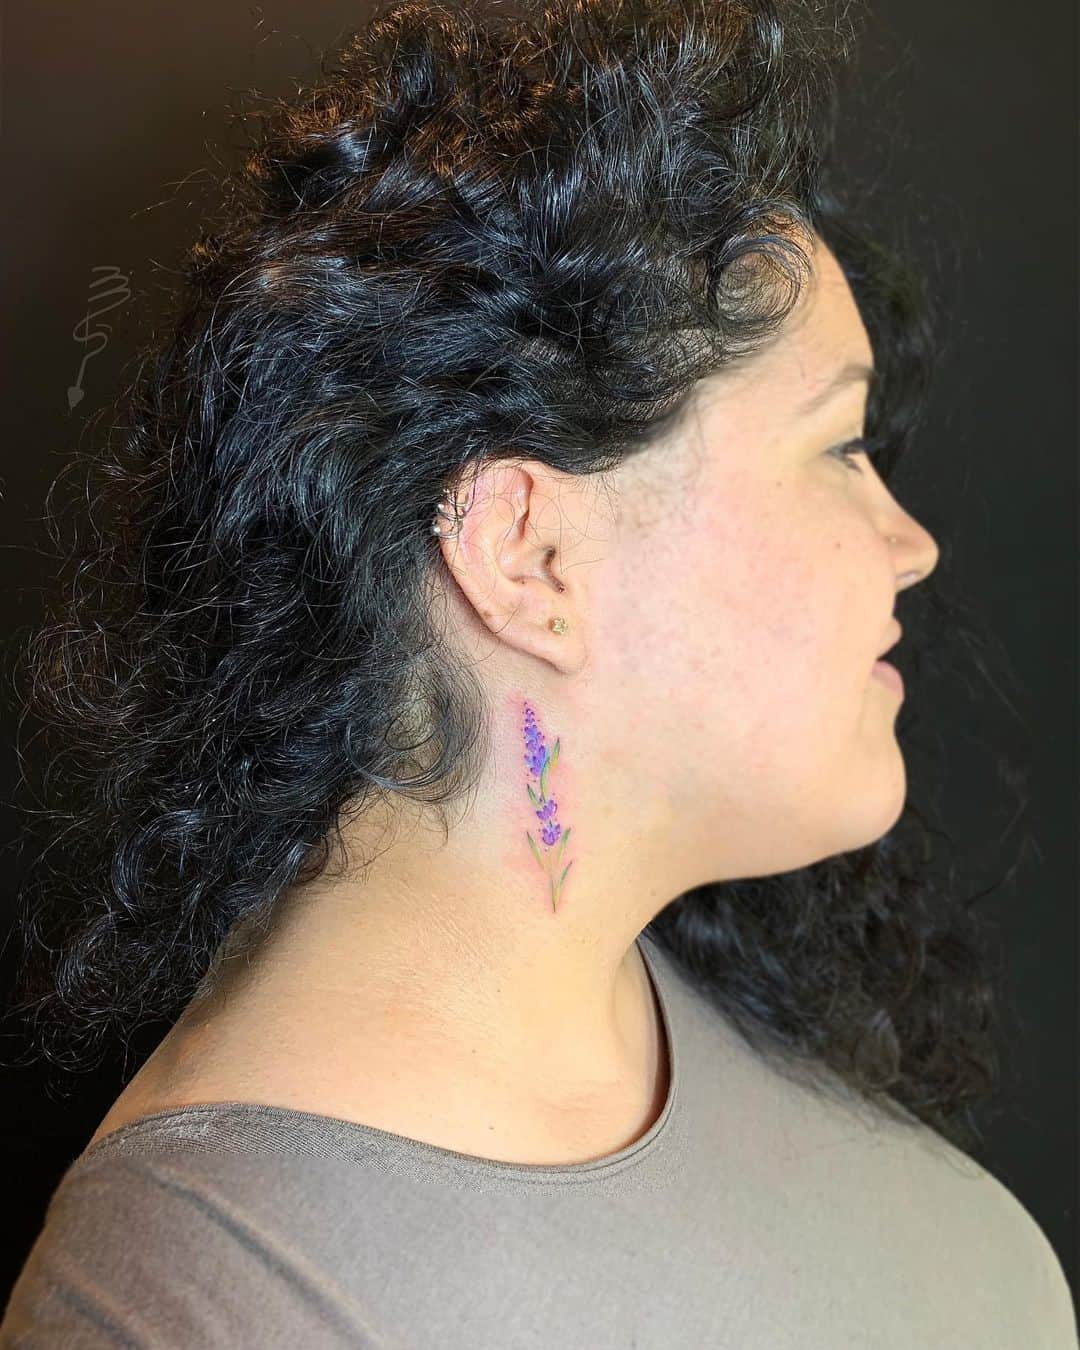 A colorful lavender tattoo behind the ear